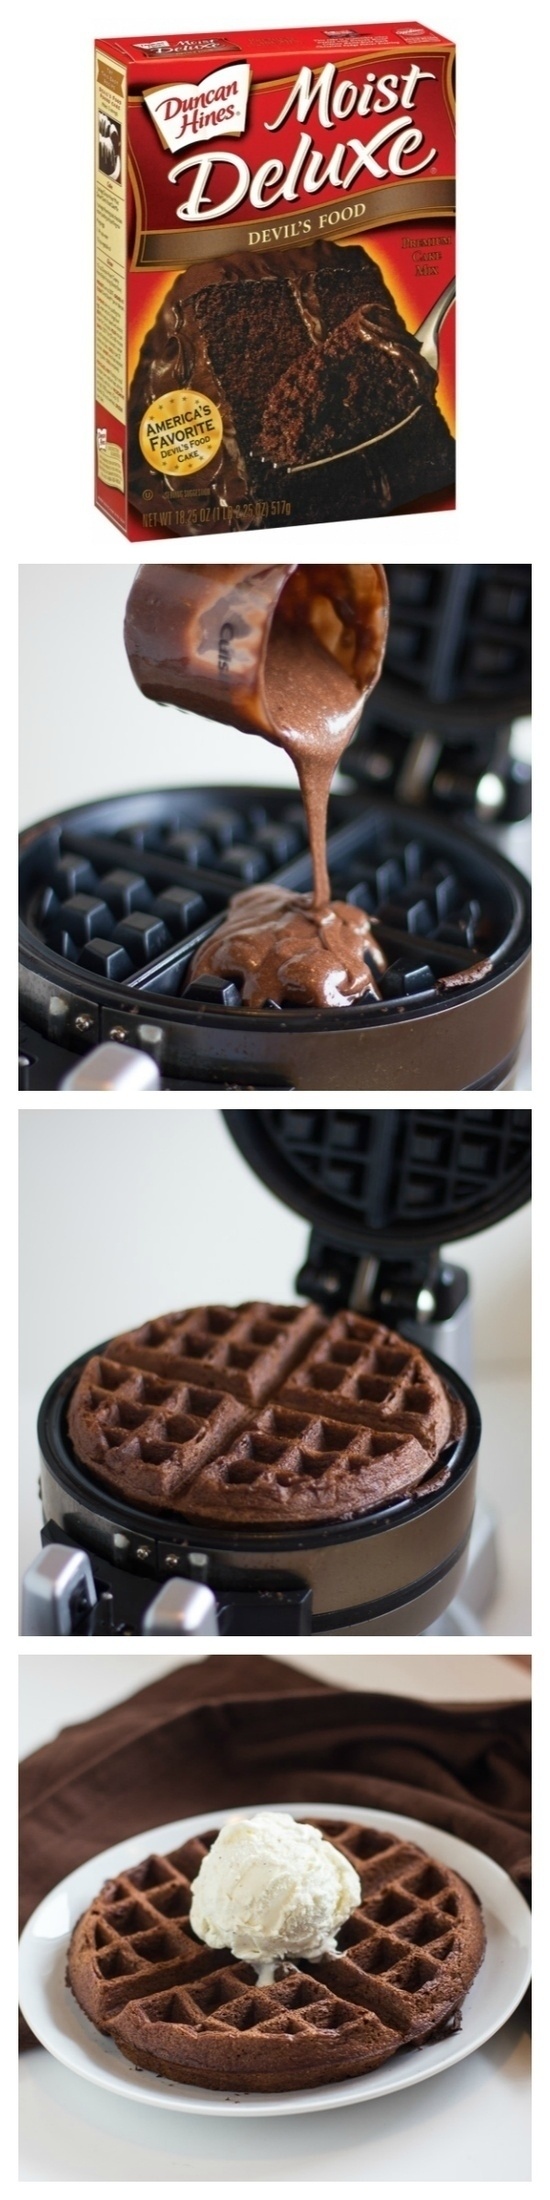 Things To Make In a Waffle Iron That Aren't Waffles2